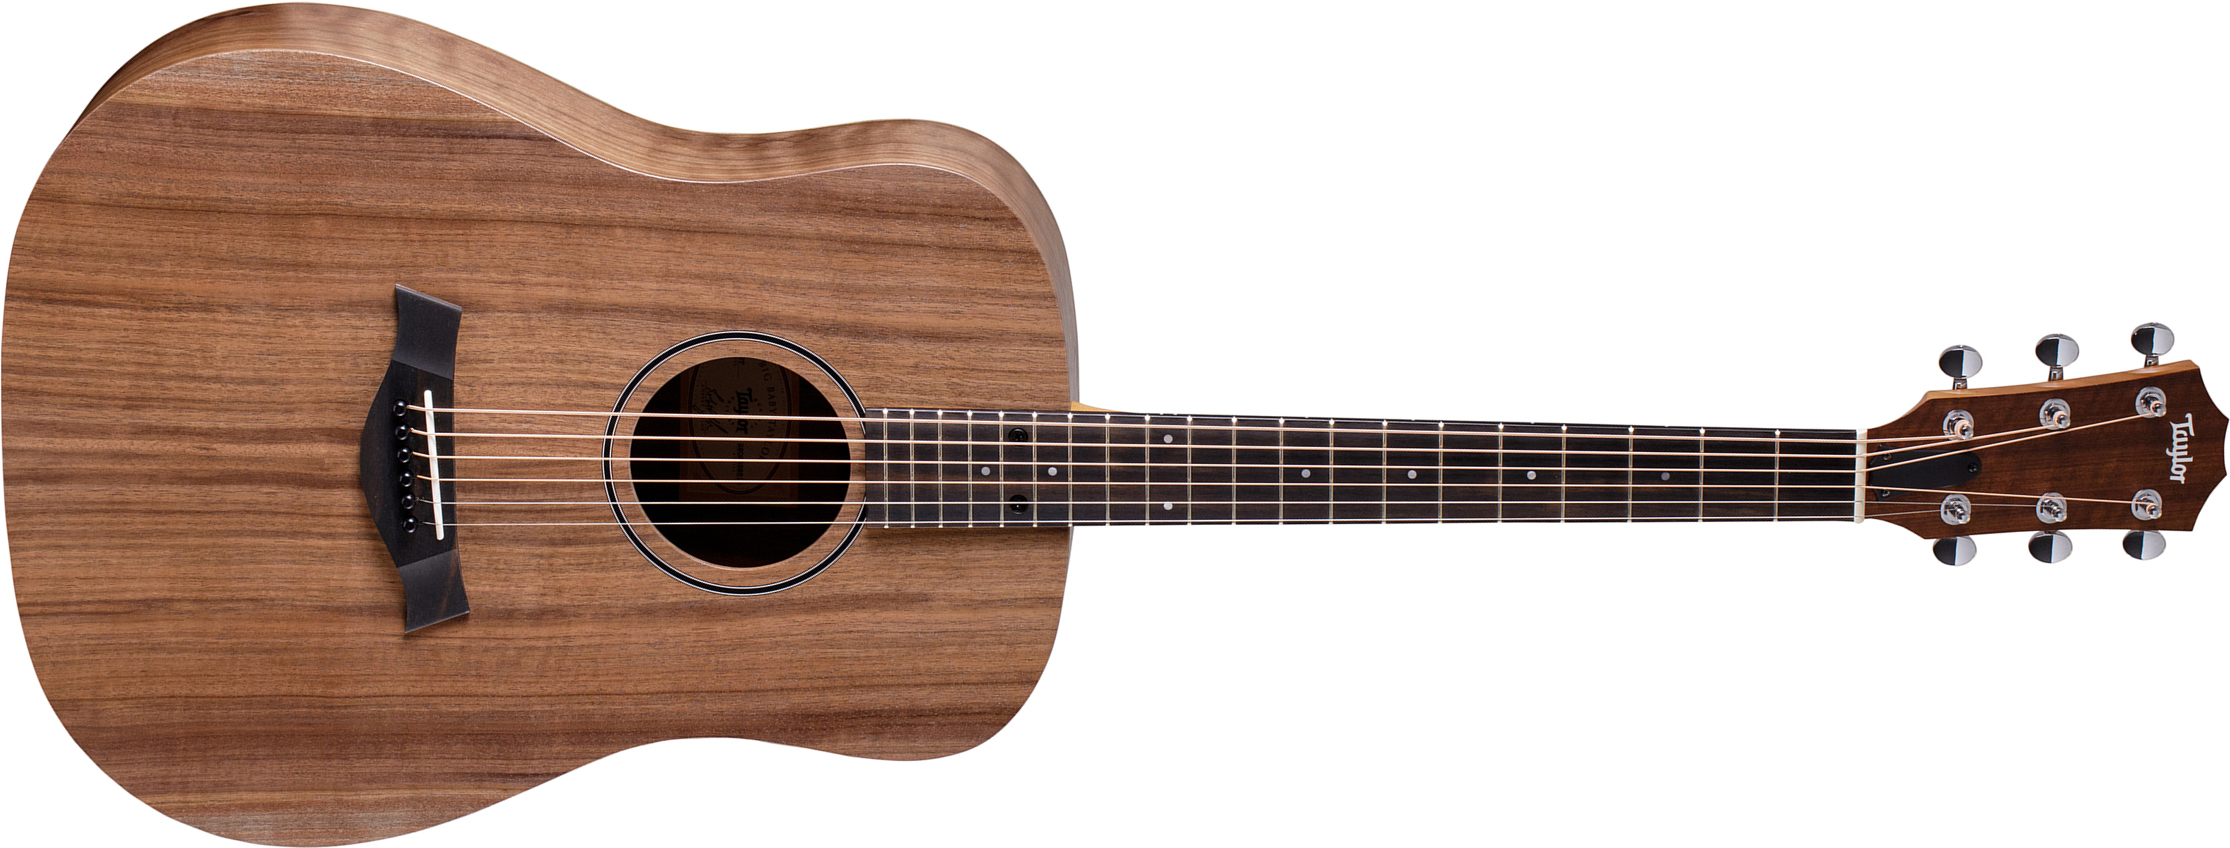 Taylor Big Baby Bbt Walnut/walnut Dreadnought 15/16 Tout Noyer Eb - Natural - Travel acoustic guitar - Main picture